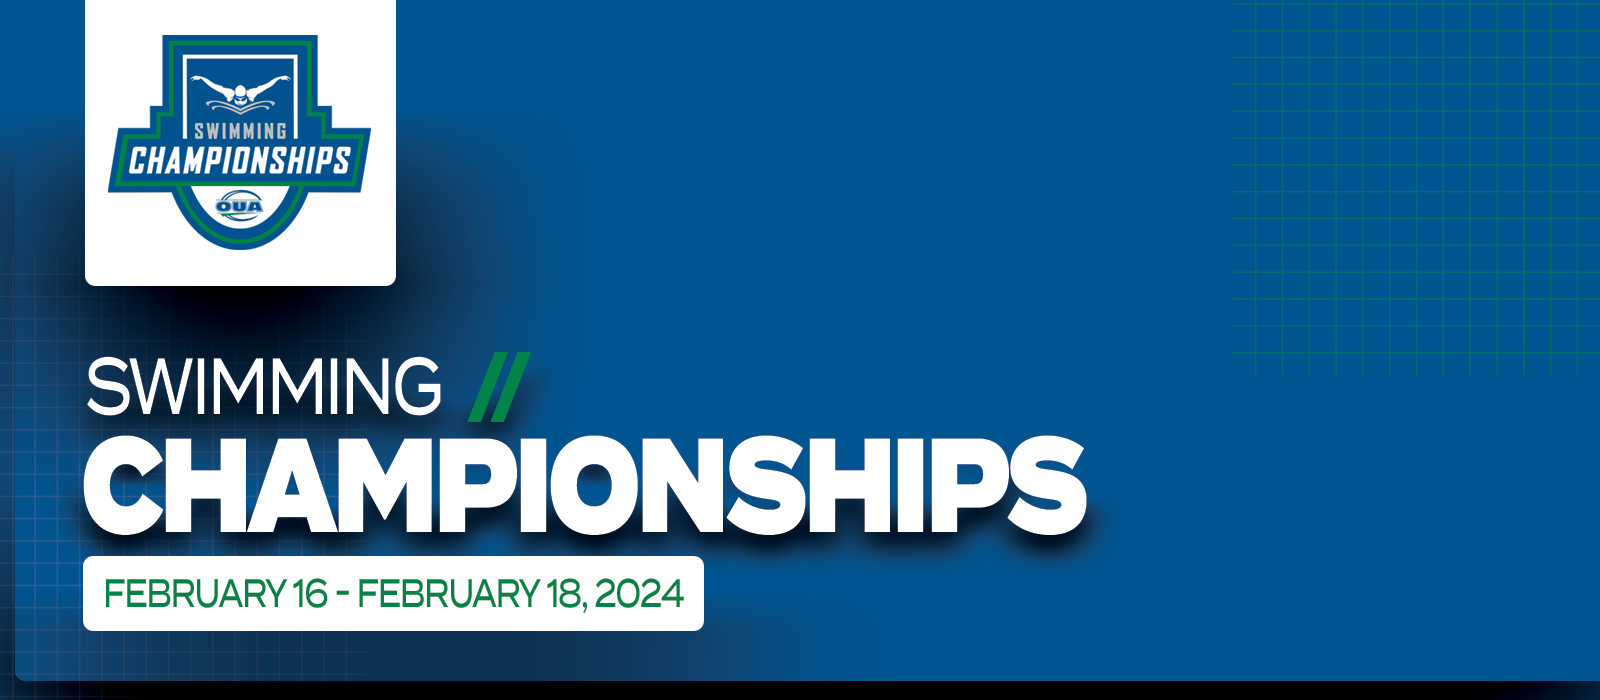 Predominantly blue graphic with large white text on the left side that reads Swimming Championships, February 16 – February 18, 2024’ beneath the OUA Swimming Championships logo